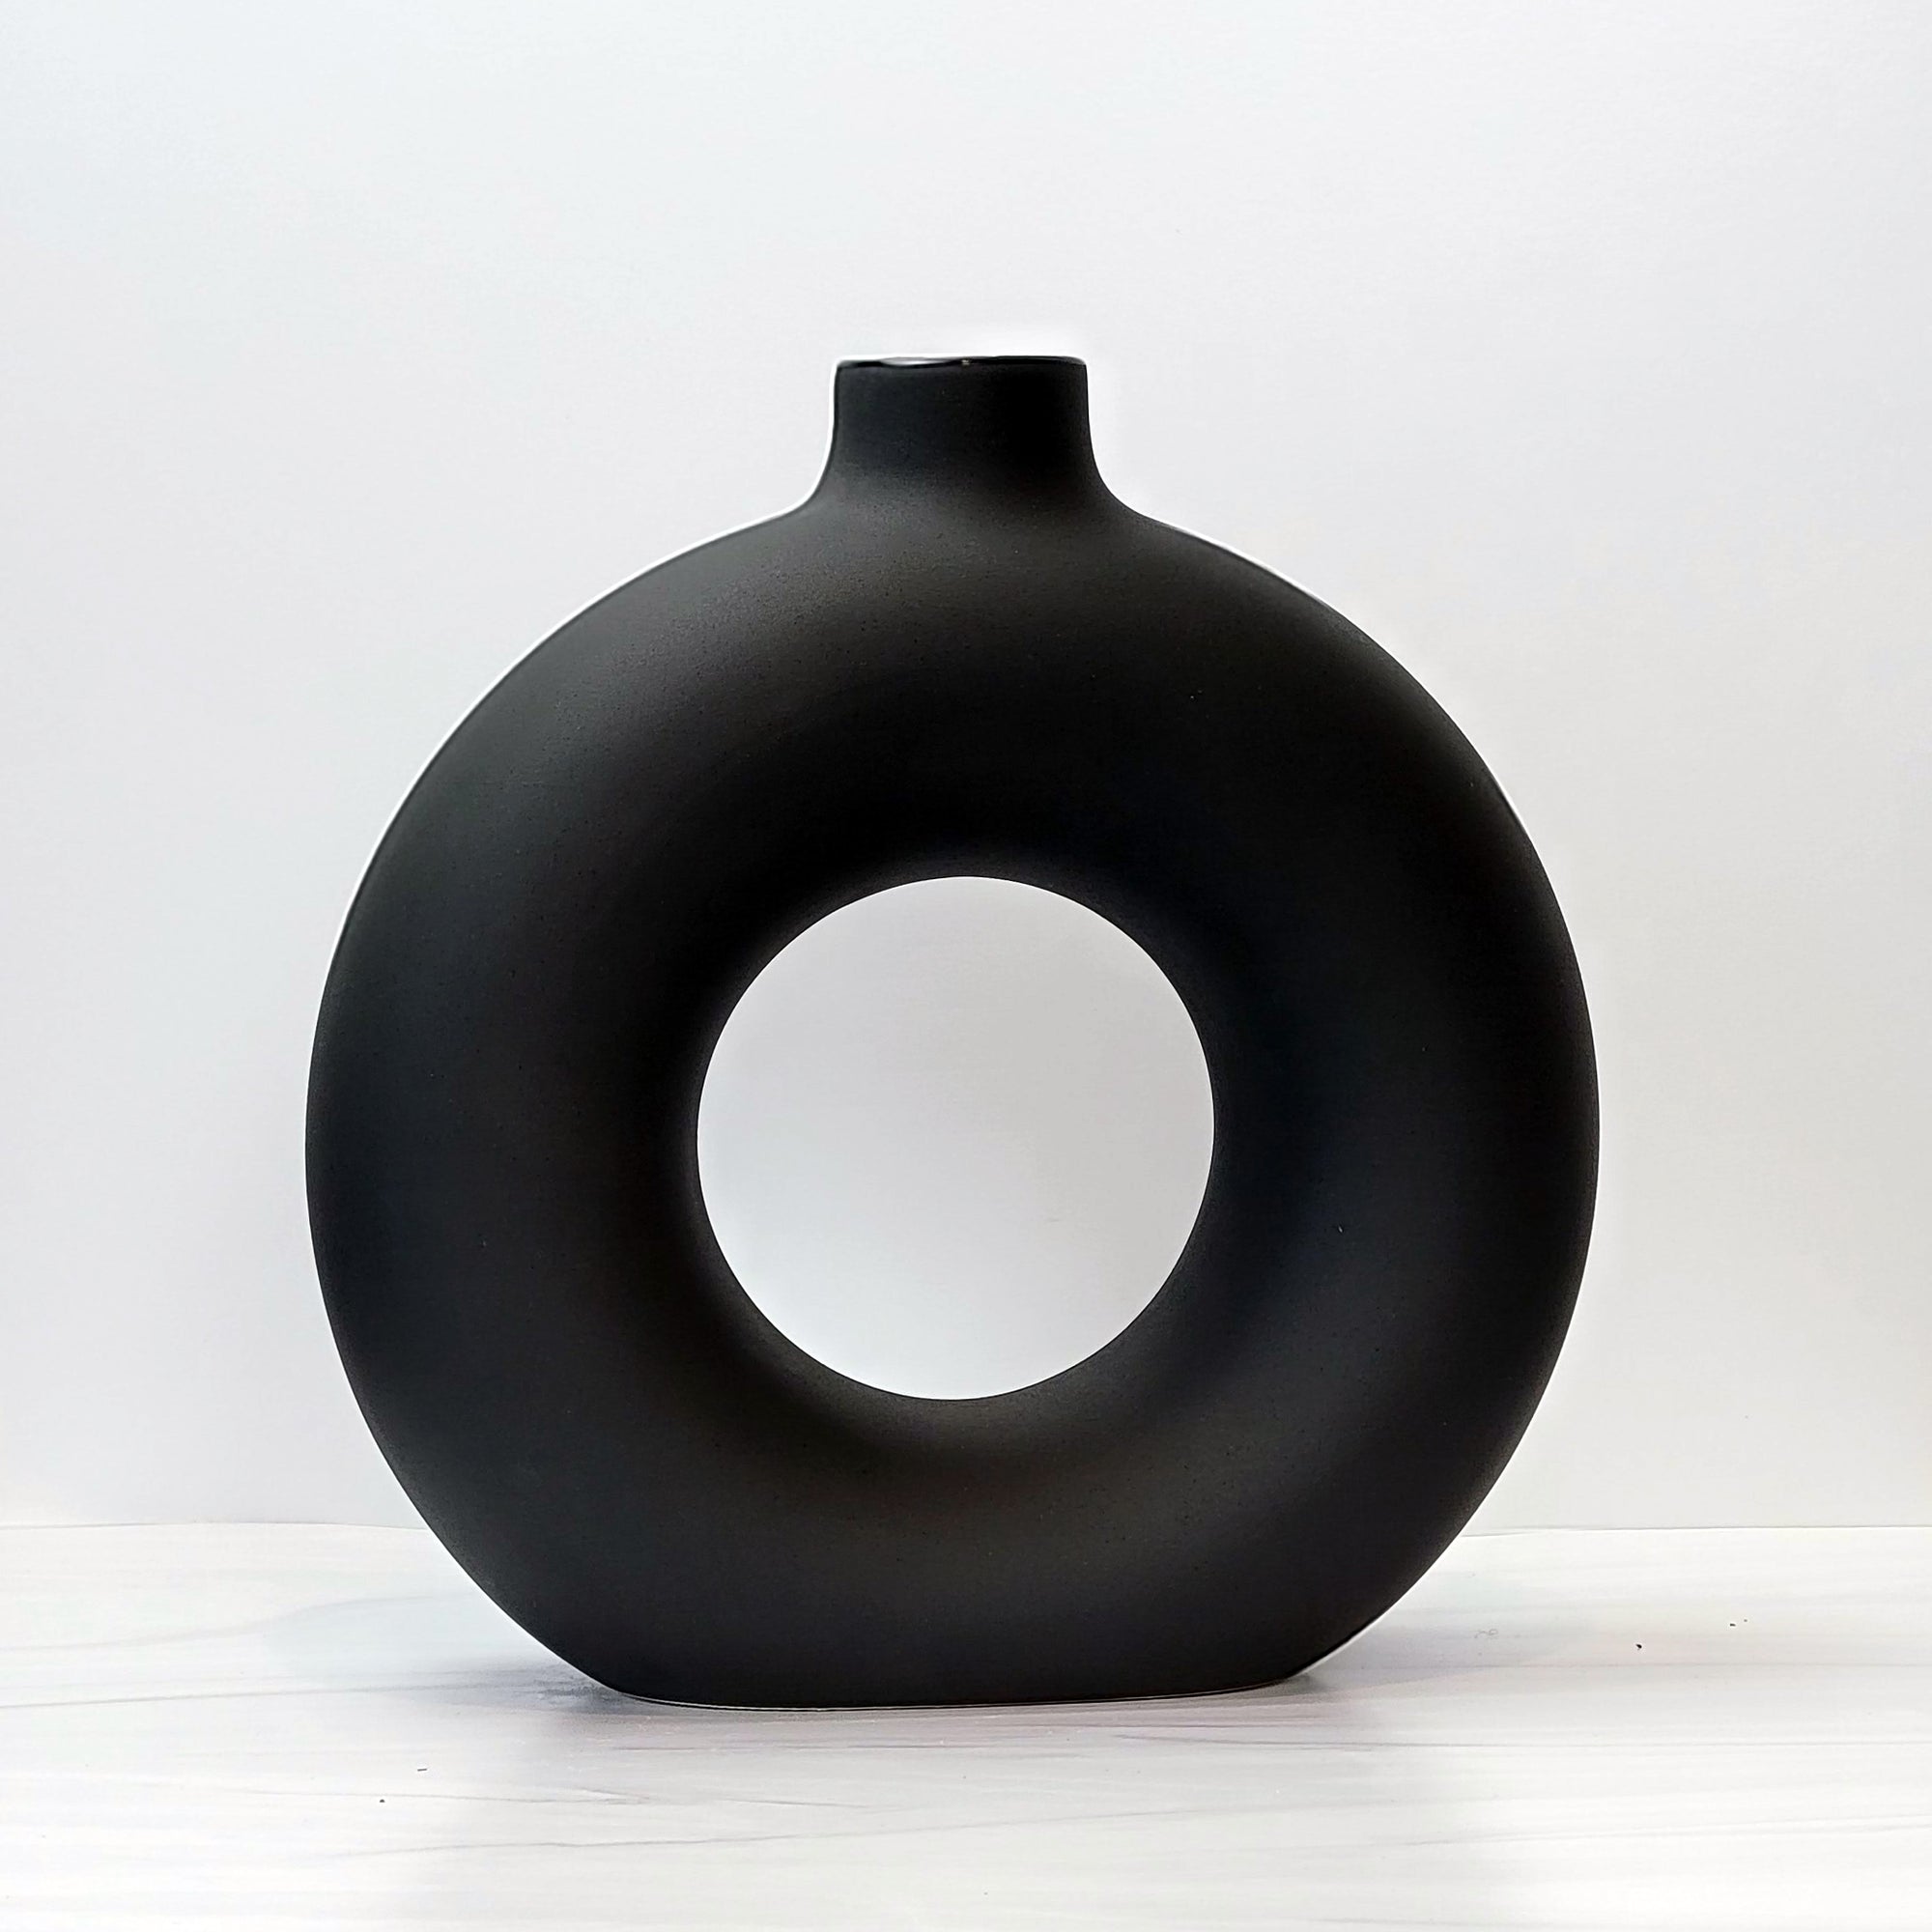 Large and small black doughnut-shaped Otto vases.